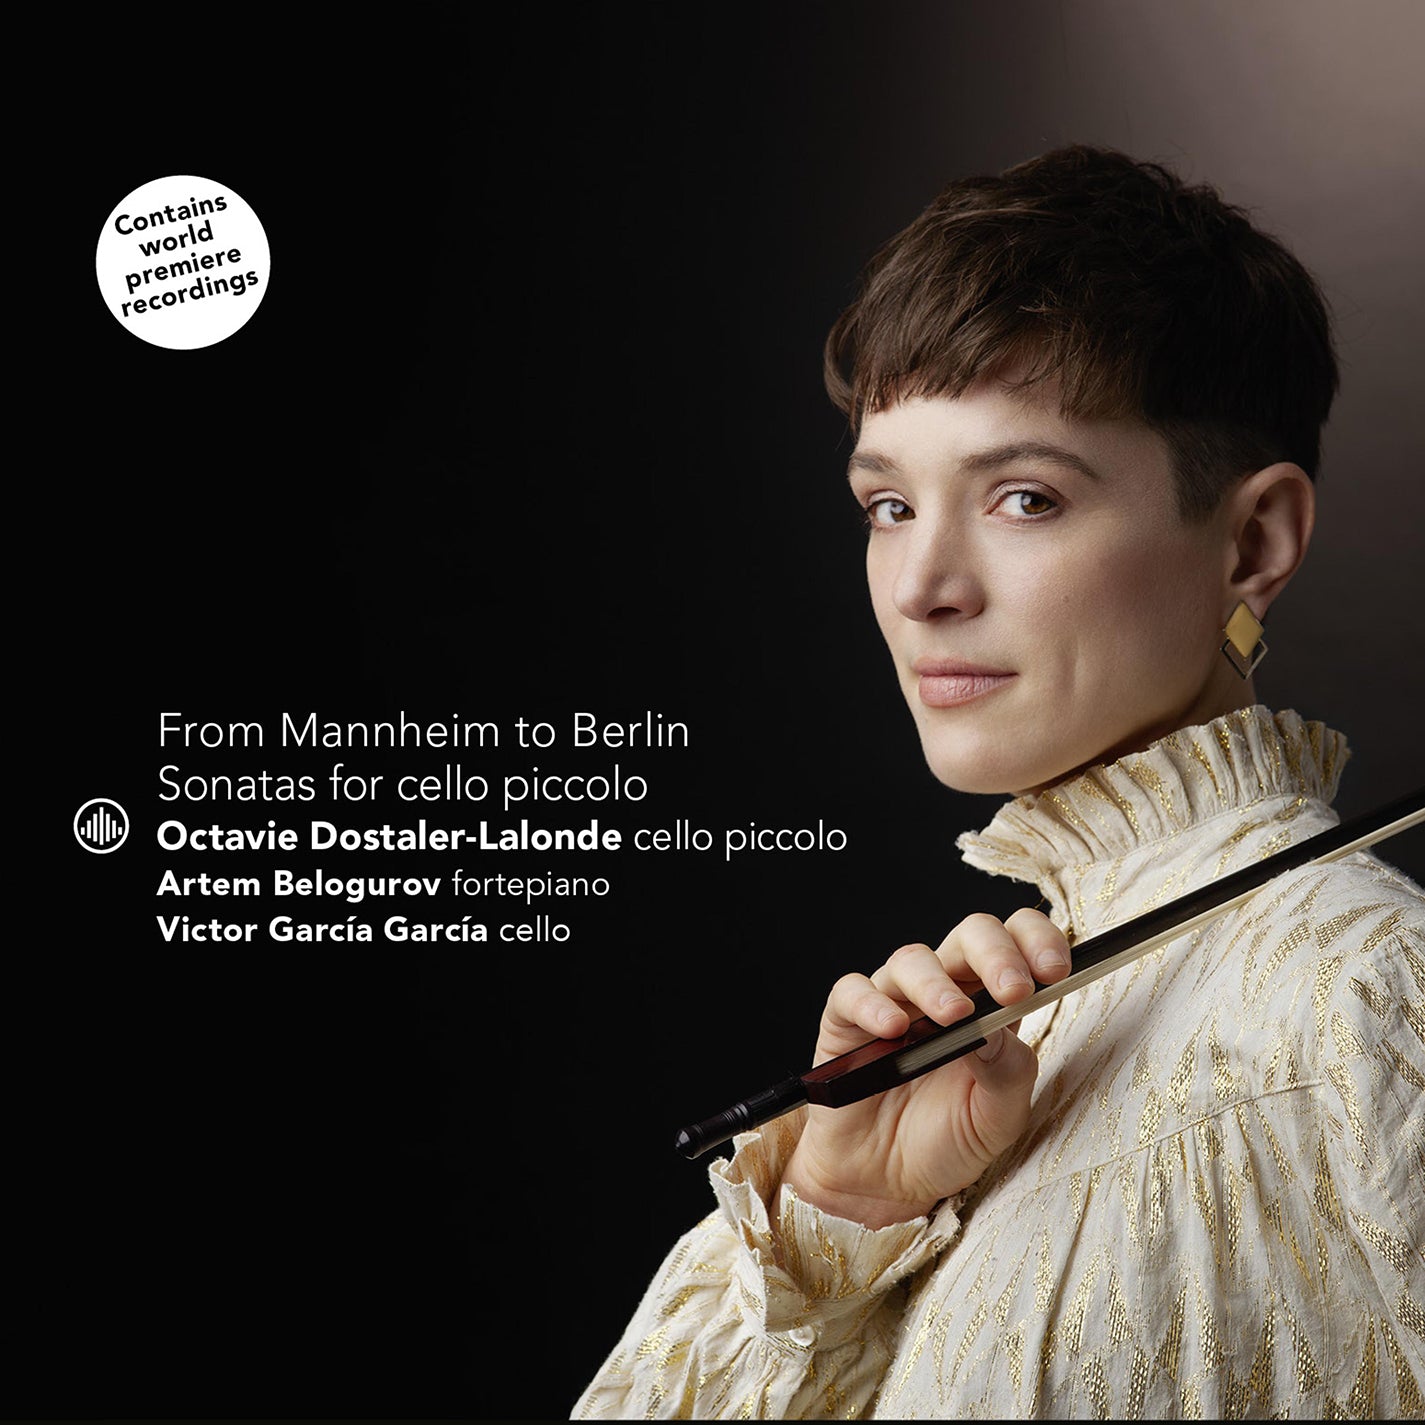 From Mannheim to Berlin - Sonatas for cello piccolo / Dostaler-Lalonde